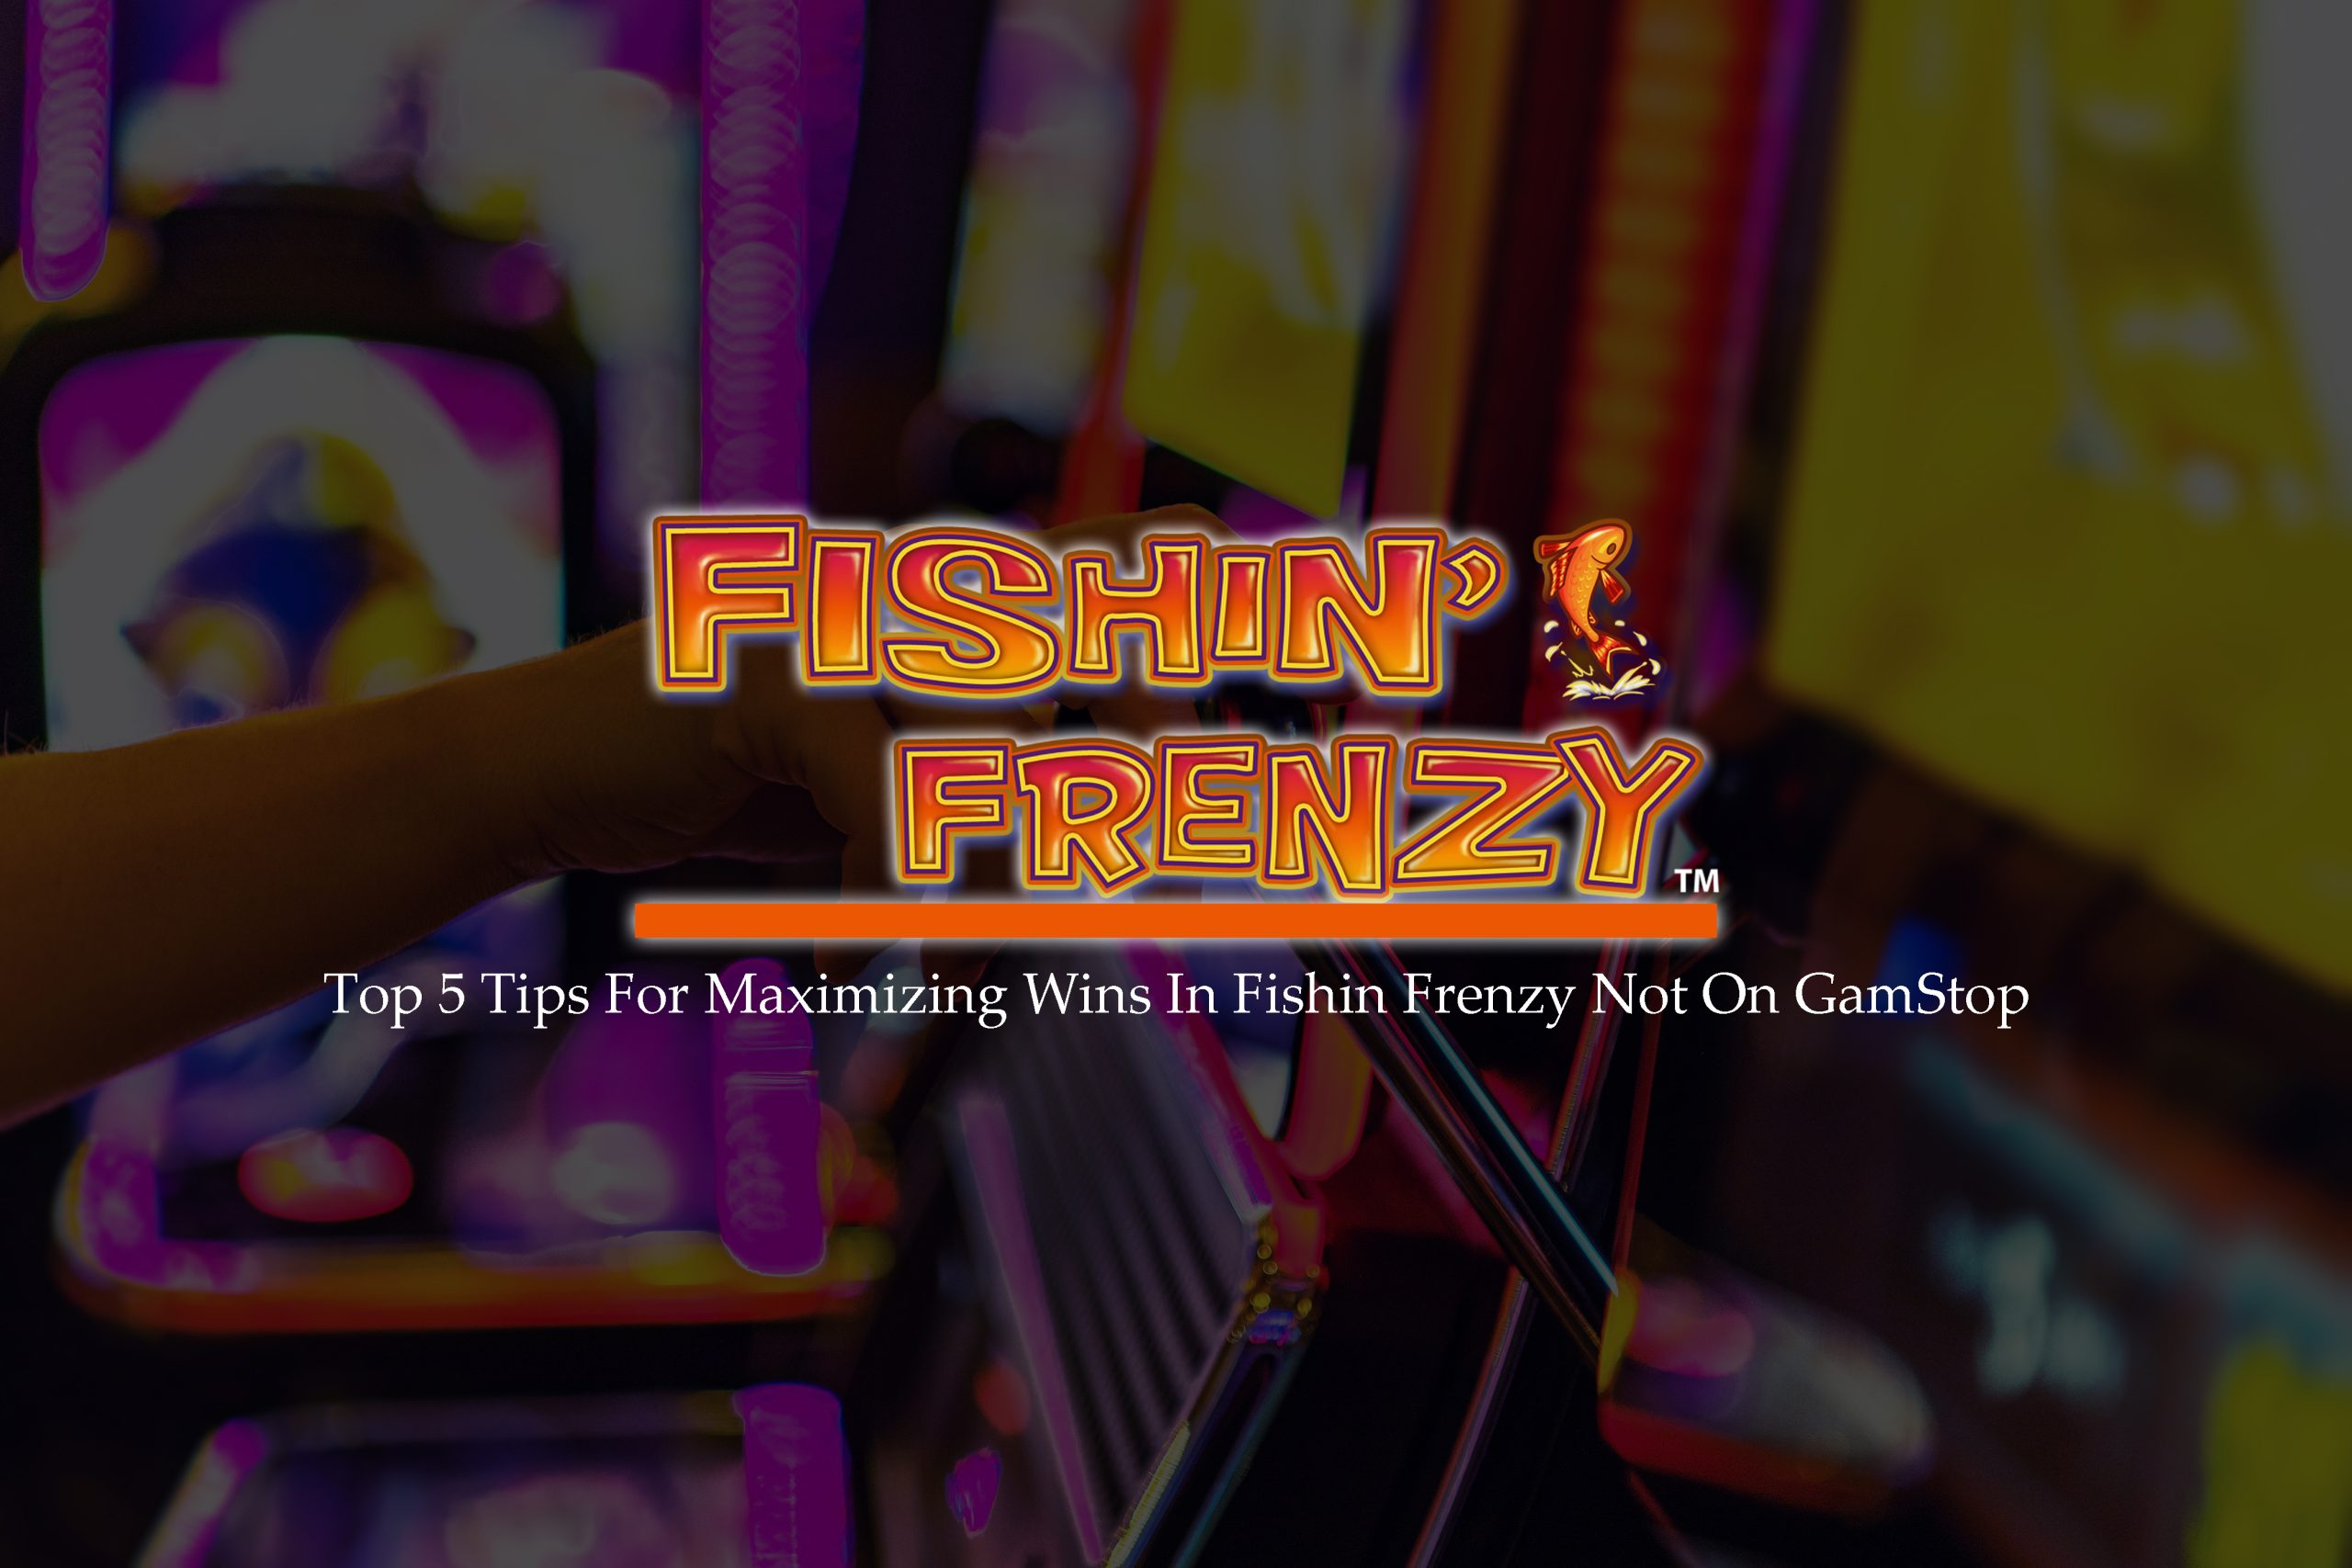 Top 5 Tips For Maximizing Wins In Fishin Frenzy Not On GamStop